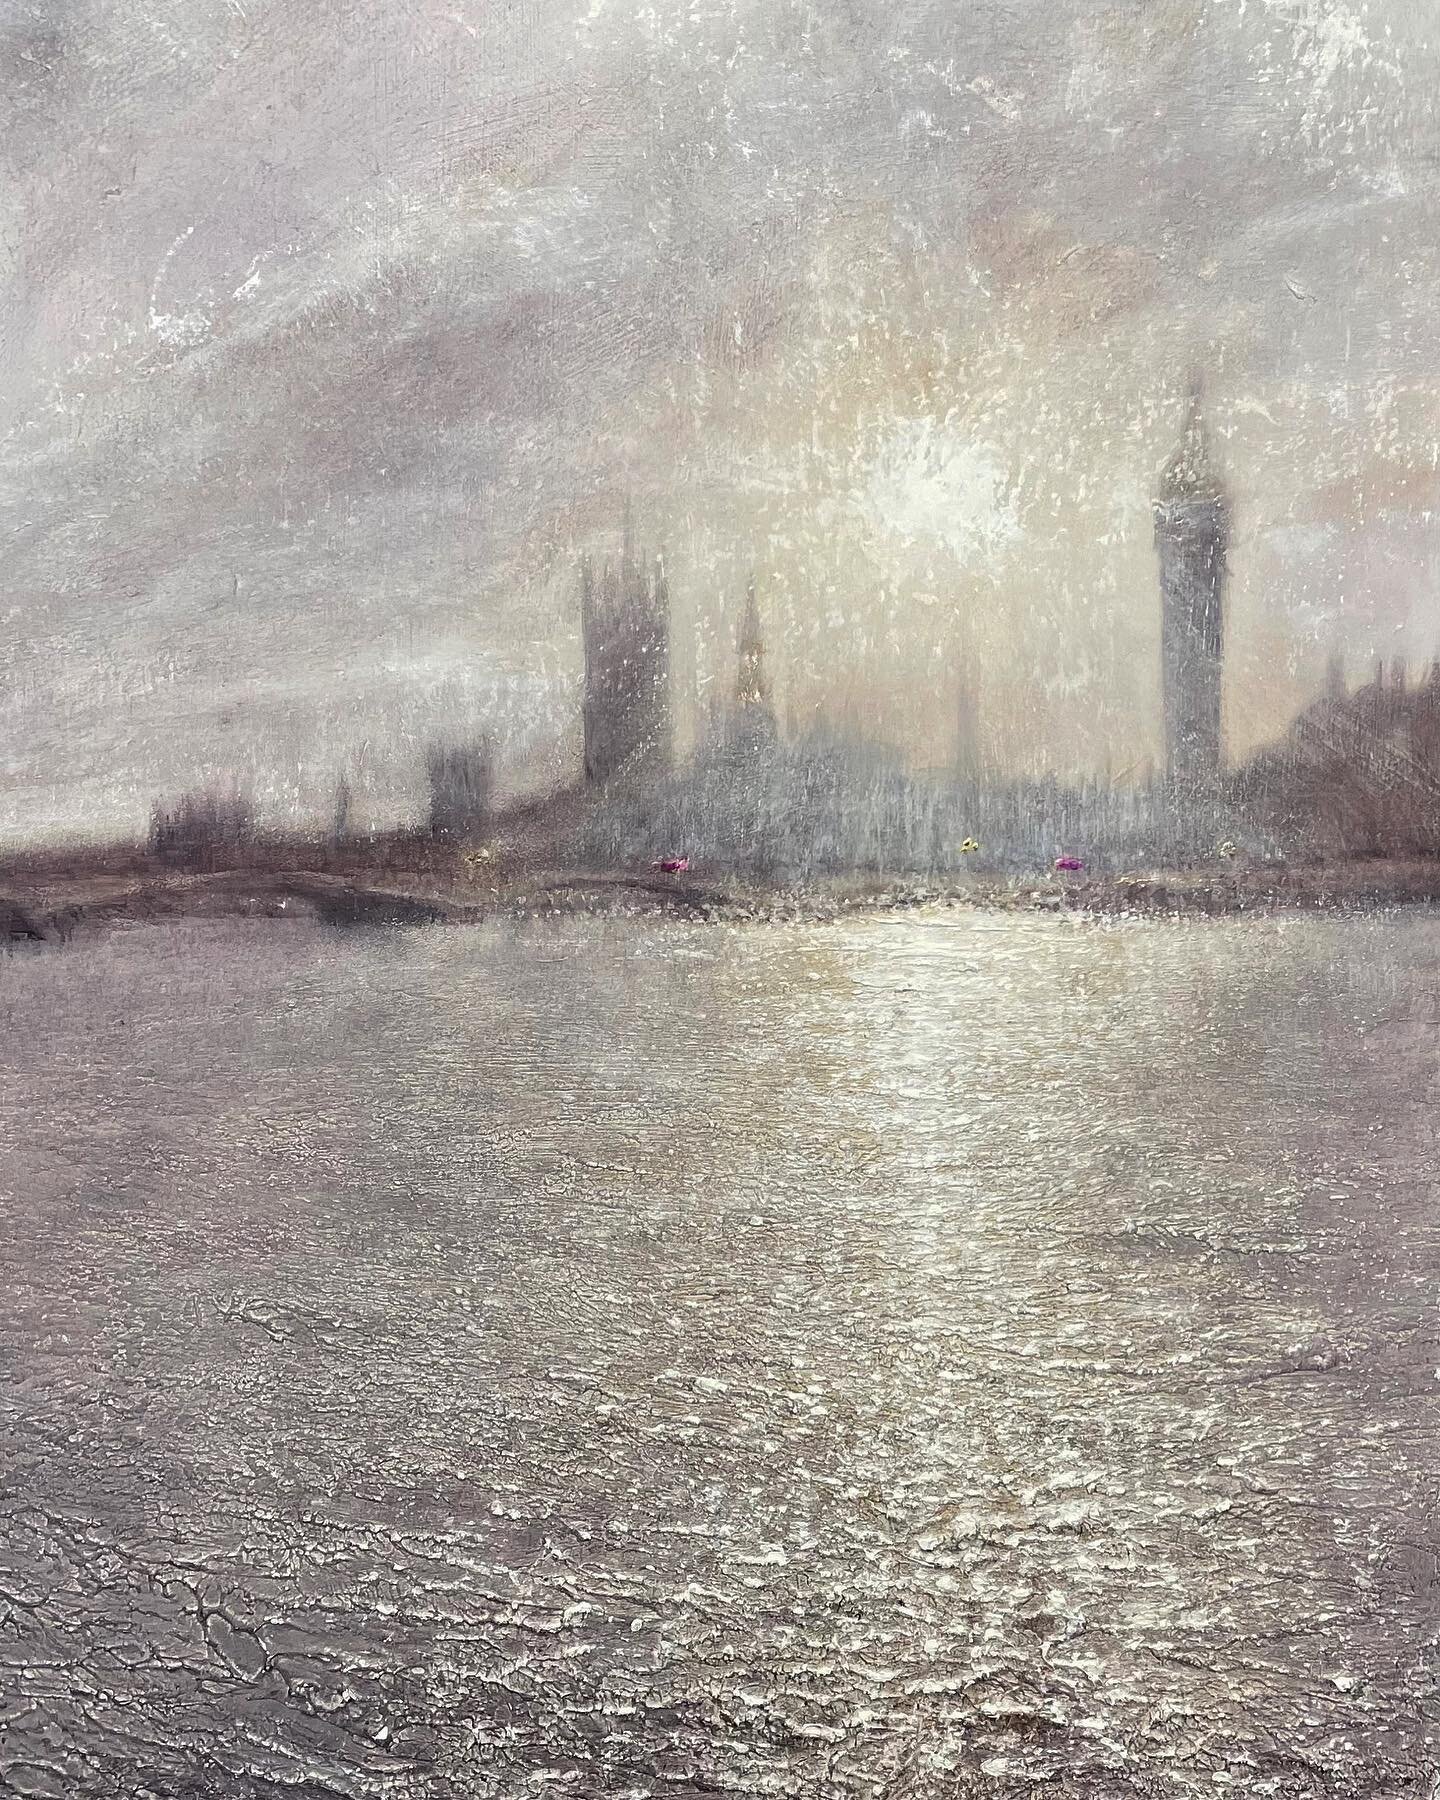 The Thames Dazzles 

Oil over textured acrylic medium on board 

#westminster  #bigbenpainting #texturepainting #londonpainting #thamespainting #affordableartfair #textureartist #oilpaintings